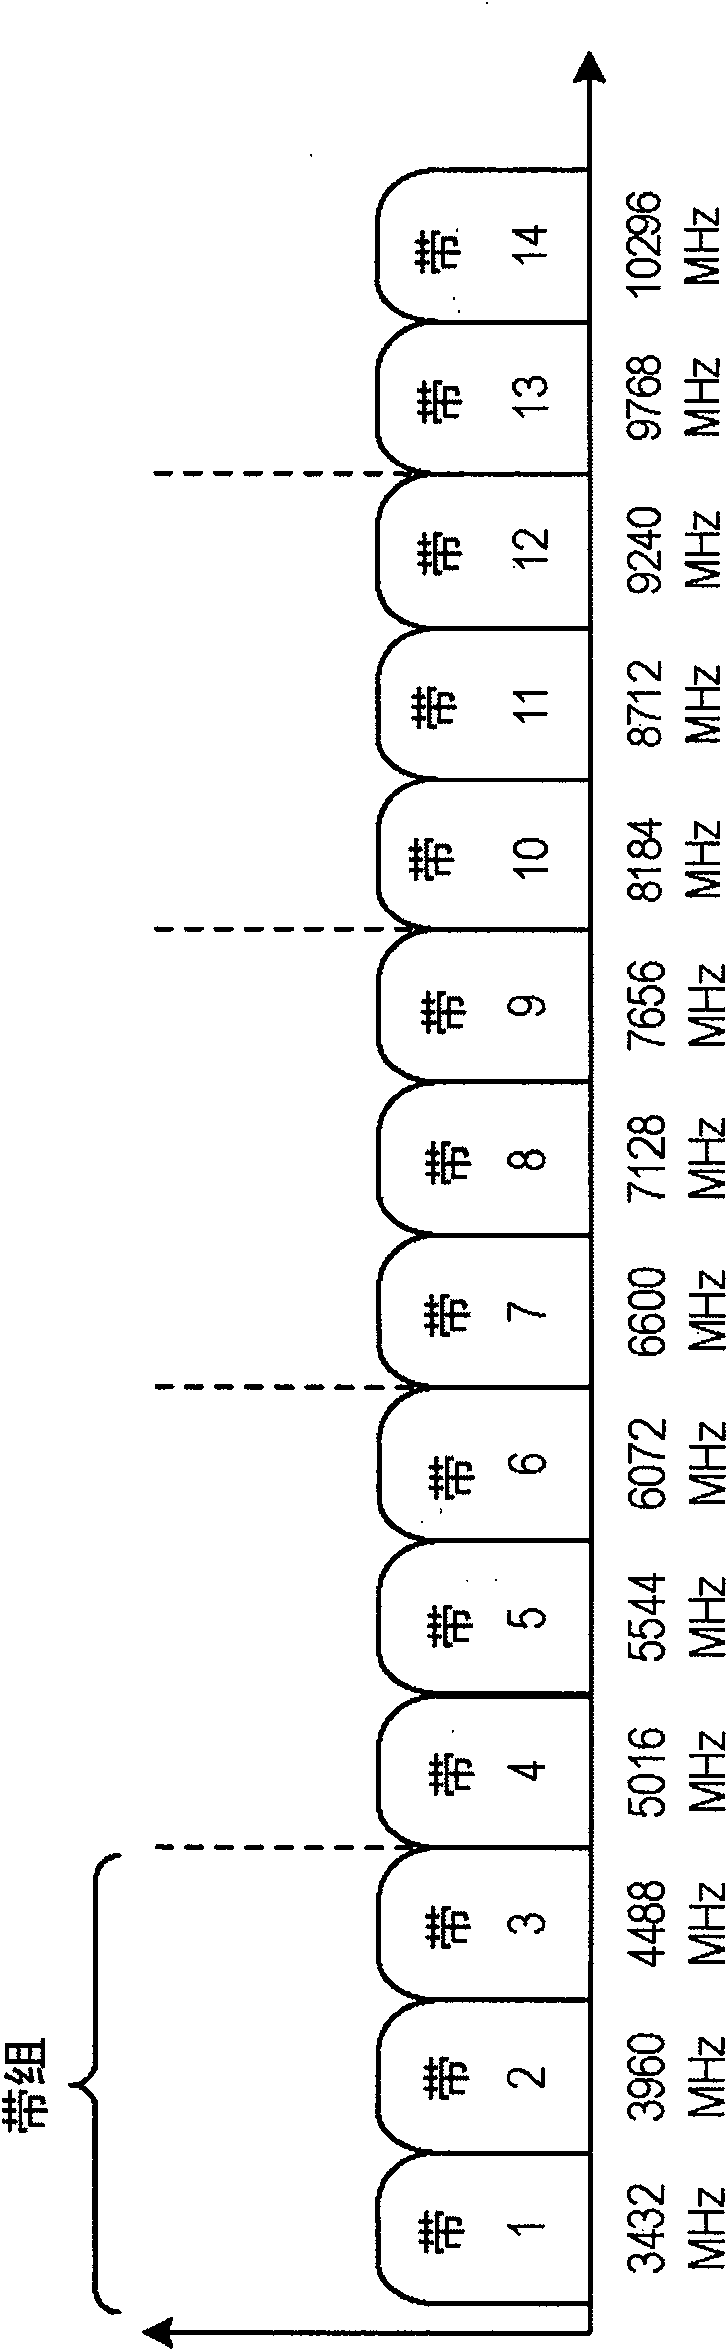 Antenna element and array of antenna elements